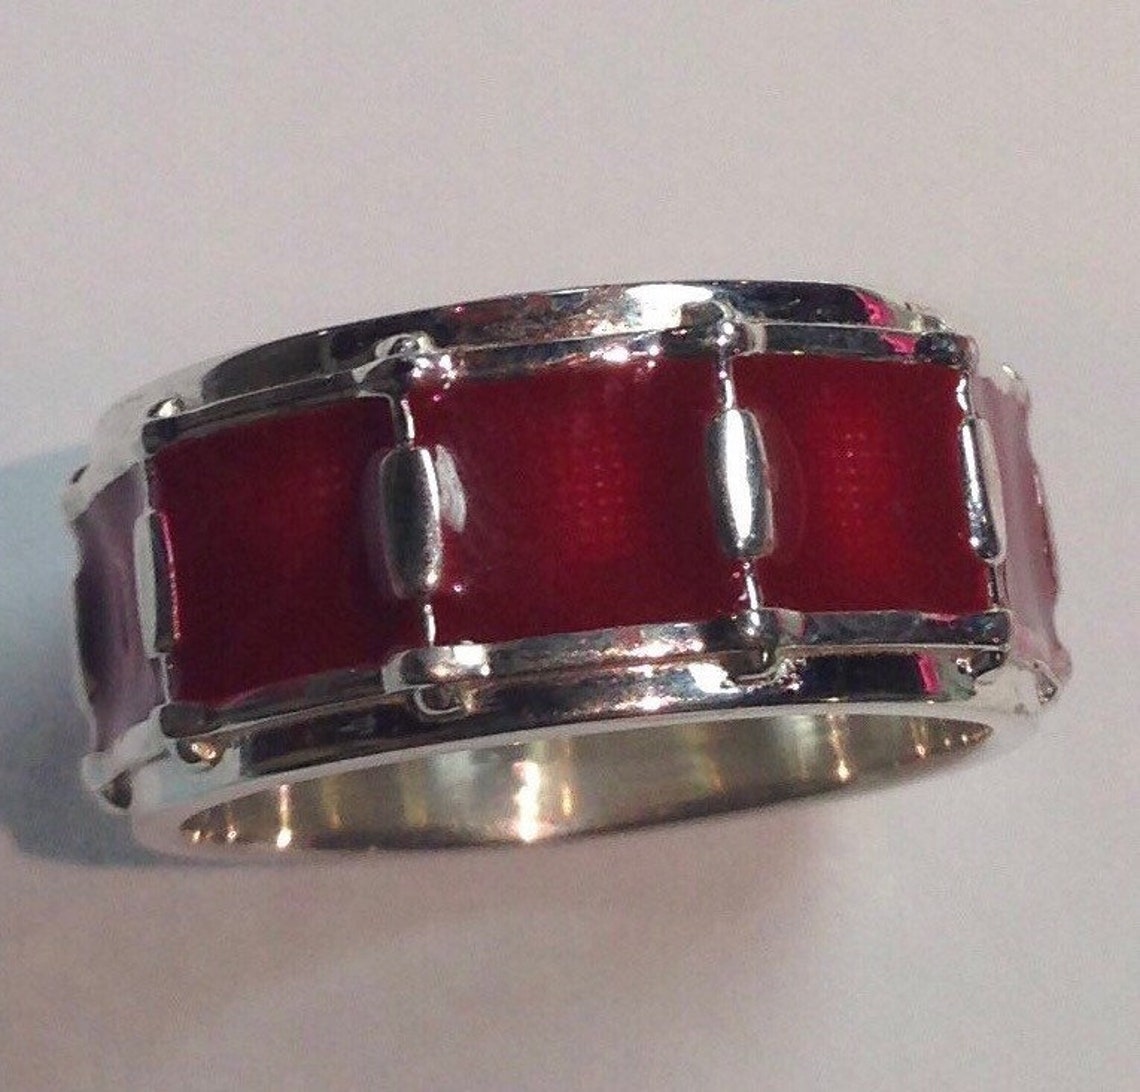 Snare Drum Ring | Etsy